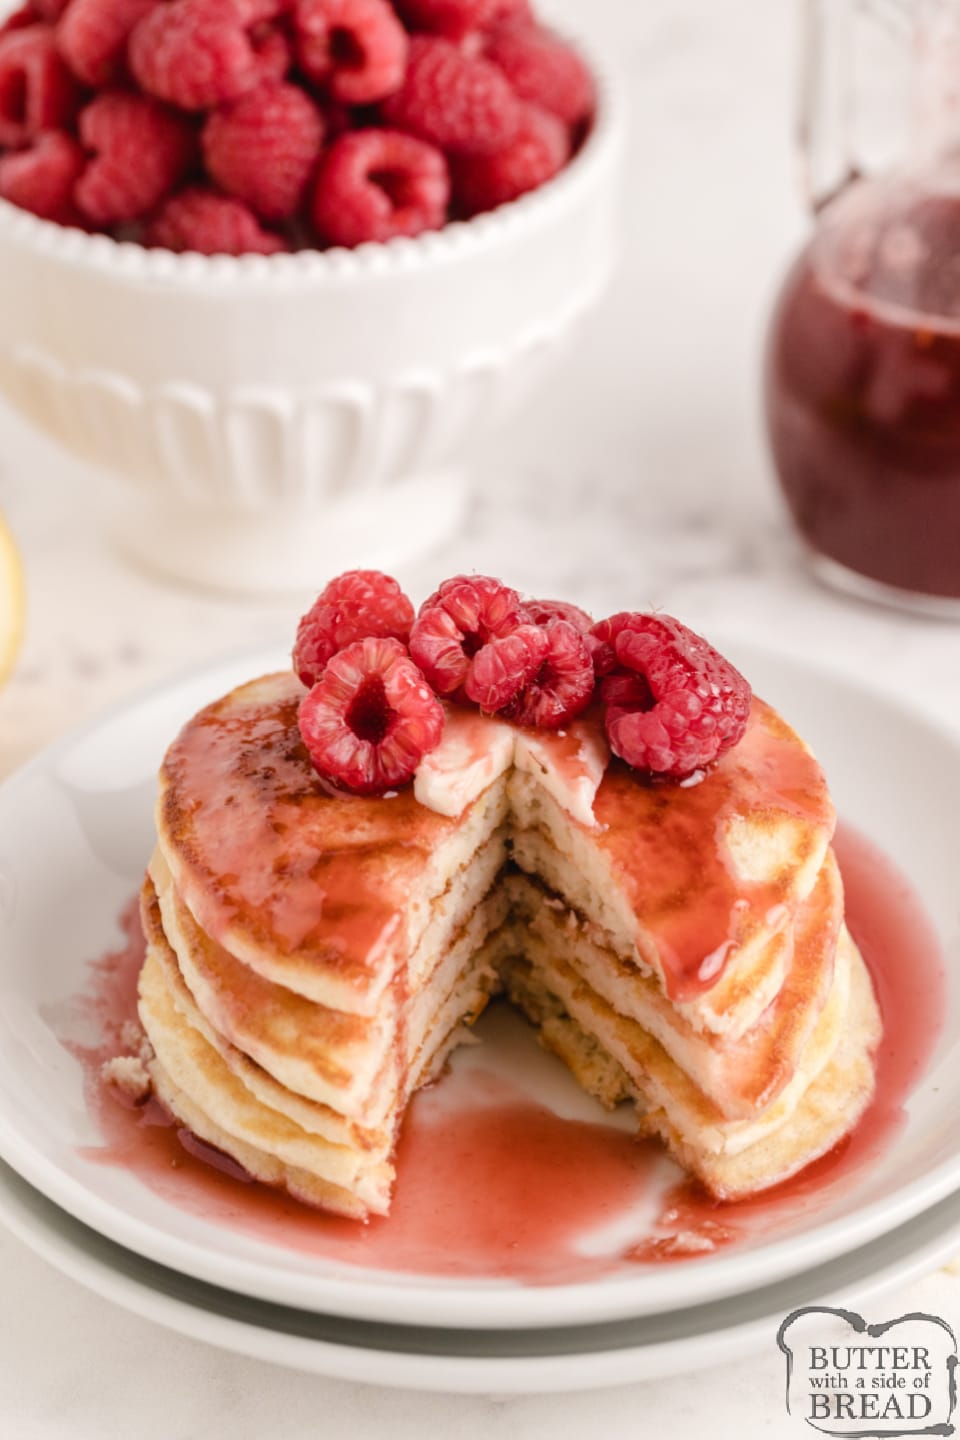 Lemon Pancakes with Raspberry Syrup are light and fluffy with a subtle lemon flavor. Top with a simple two-ingredient raspberry syrup made with frozen raspberries for a delicious pancake breakfast.